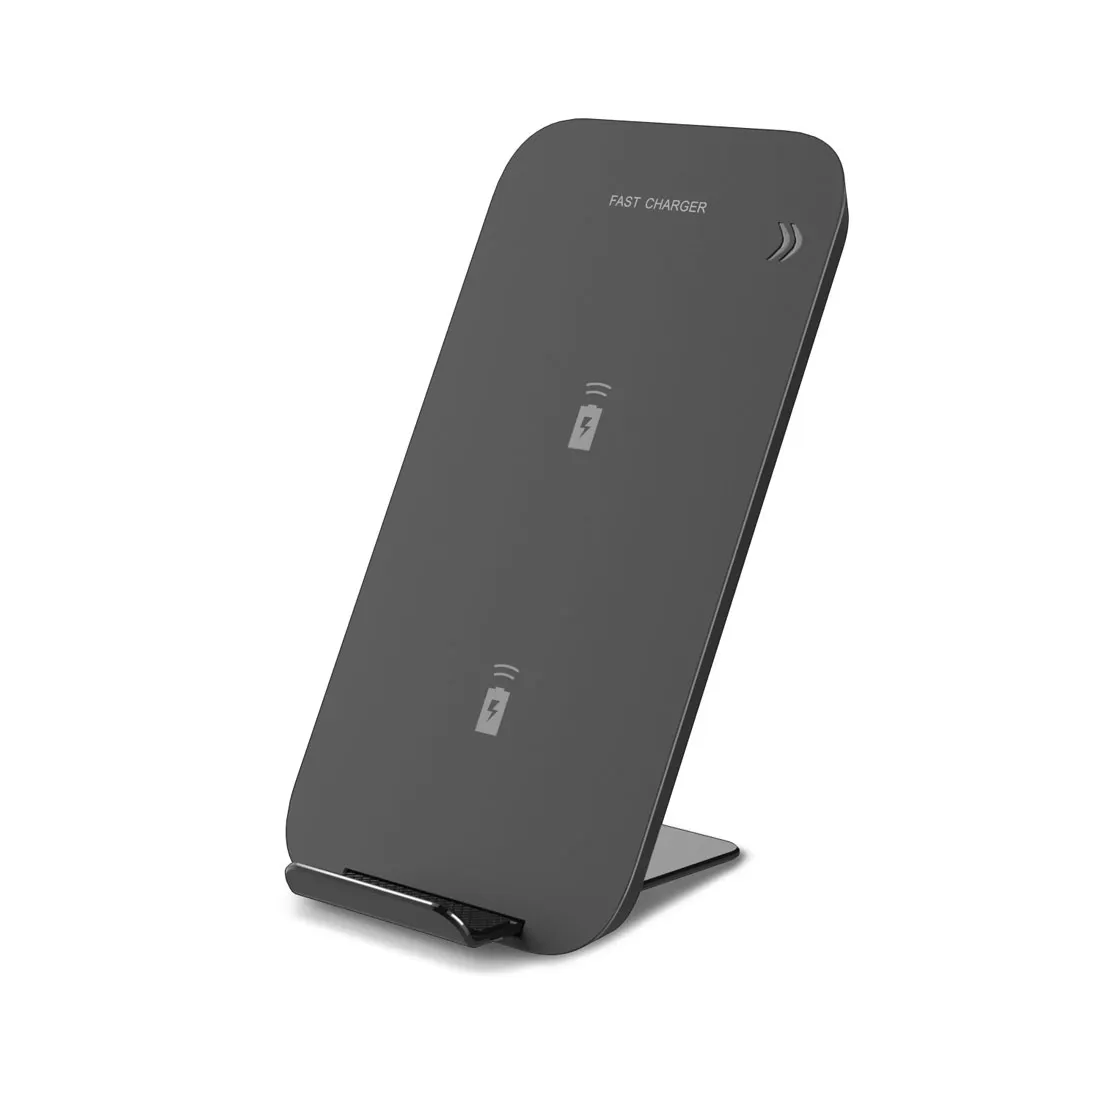 LVSHUO 10w Fast Charge Wireless Charger Stand Qi Wireless Charging Dock for Cell Phone